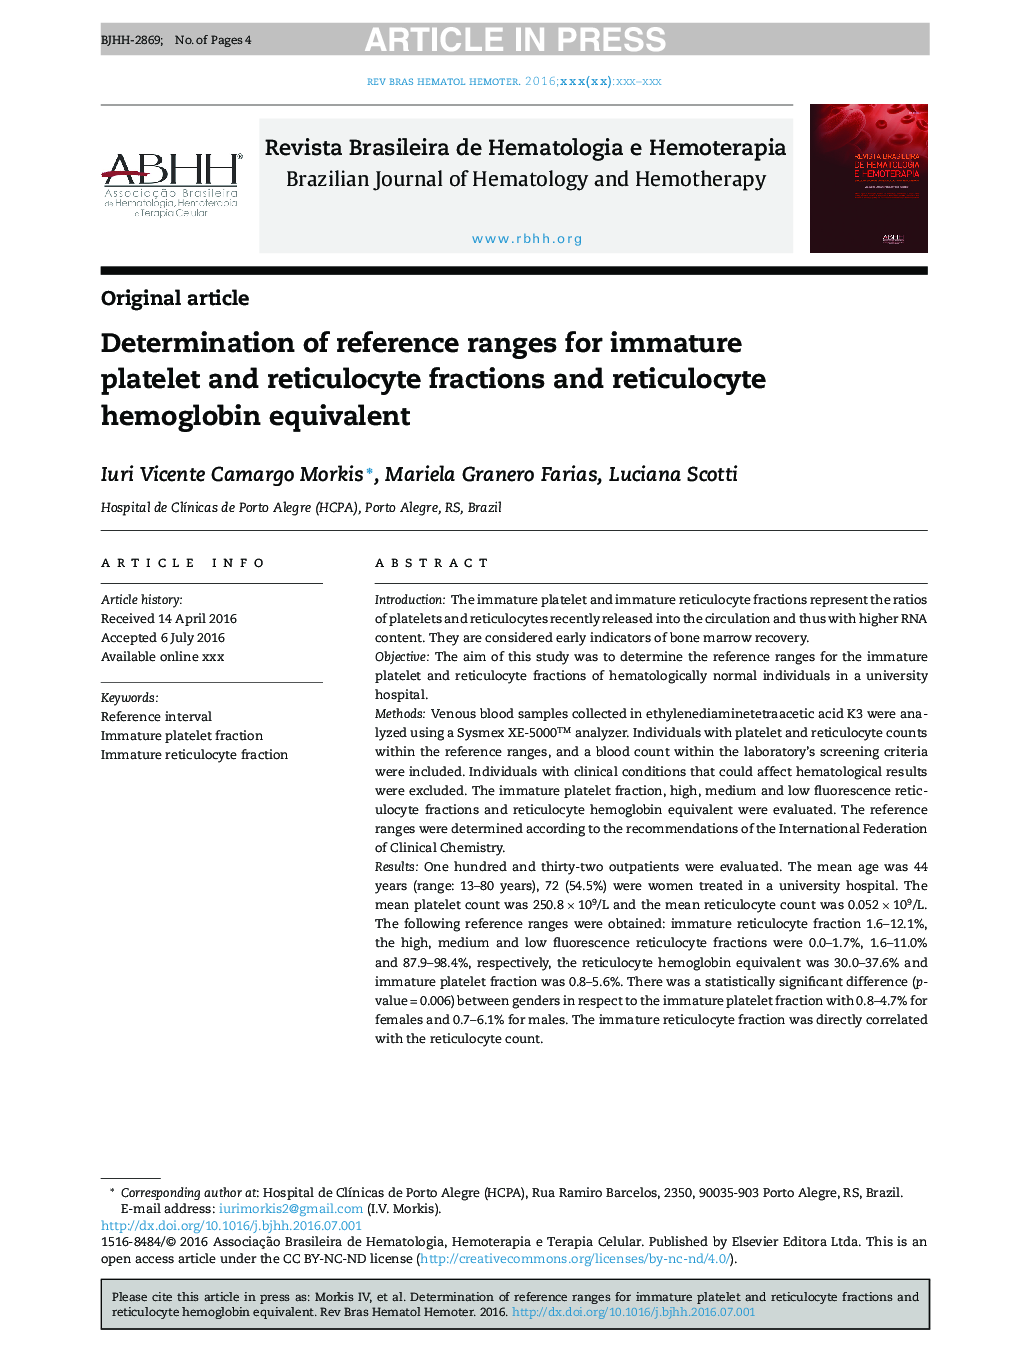 Determination of reference ranges for immature platelet and reticulocyte fractions and reticulocyte hemoglobin equivalent